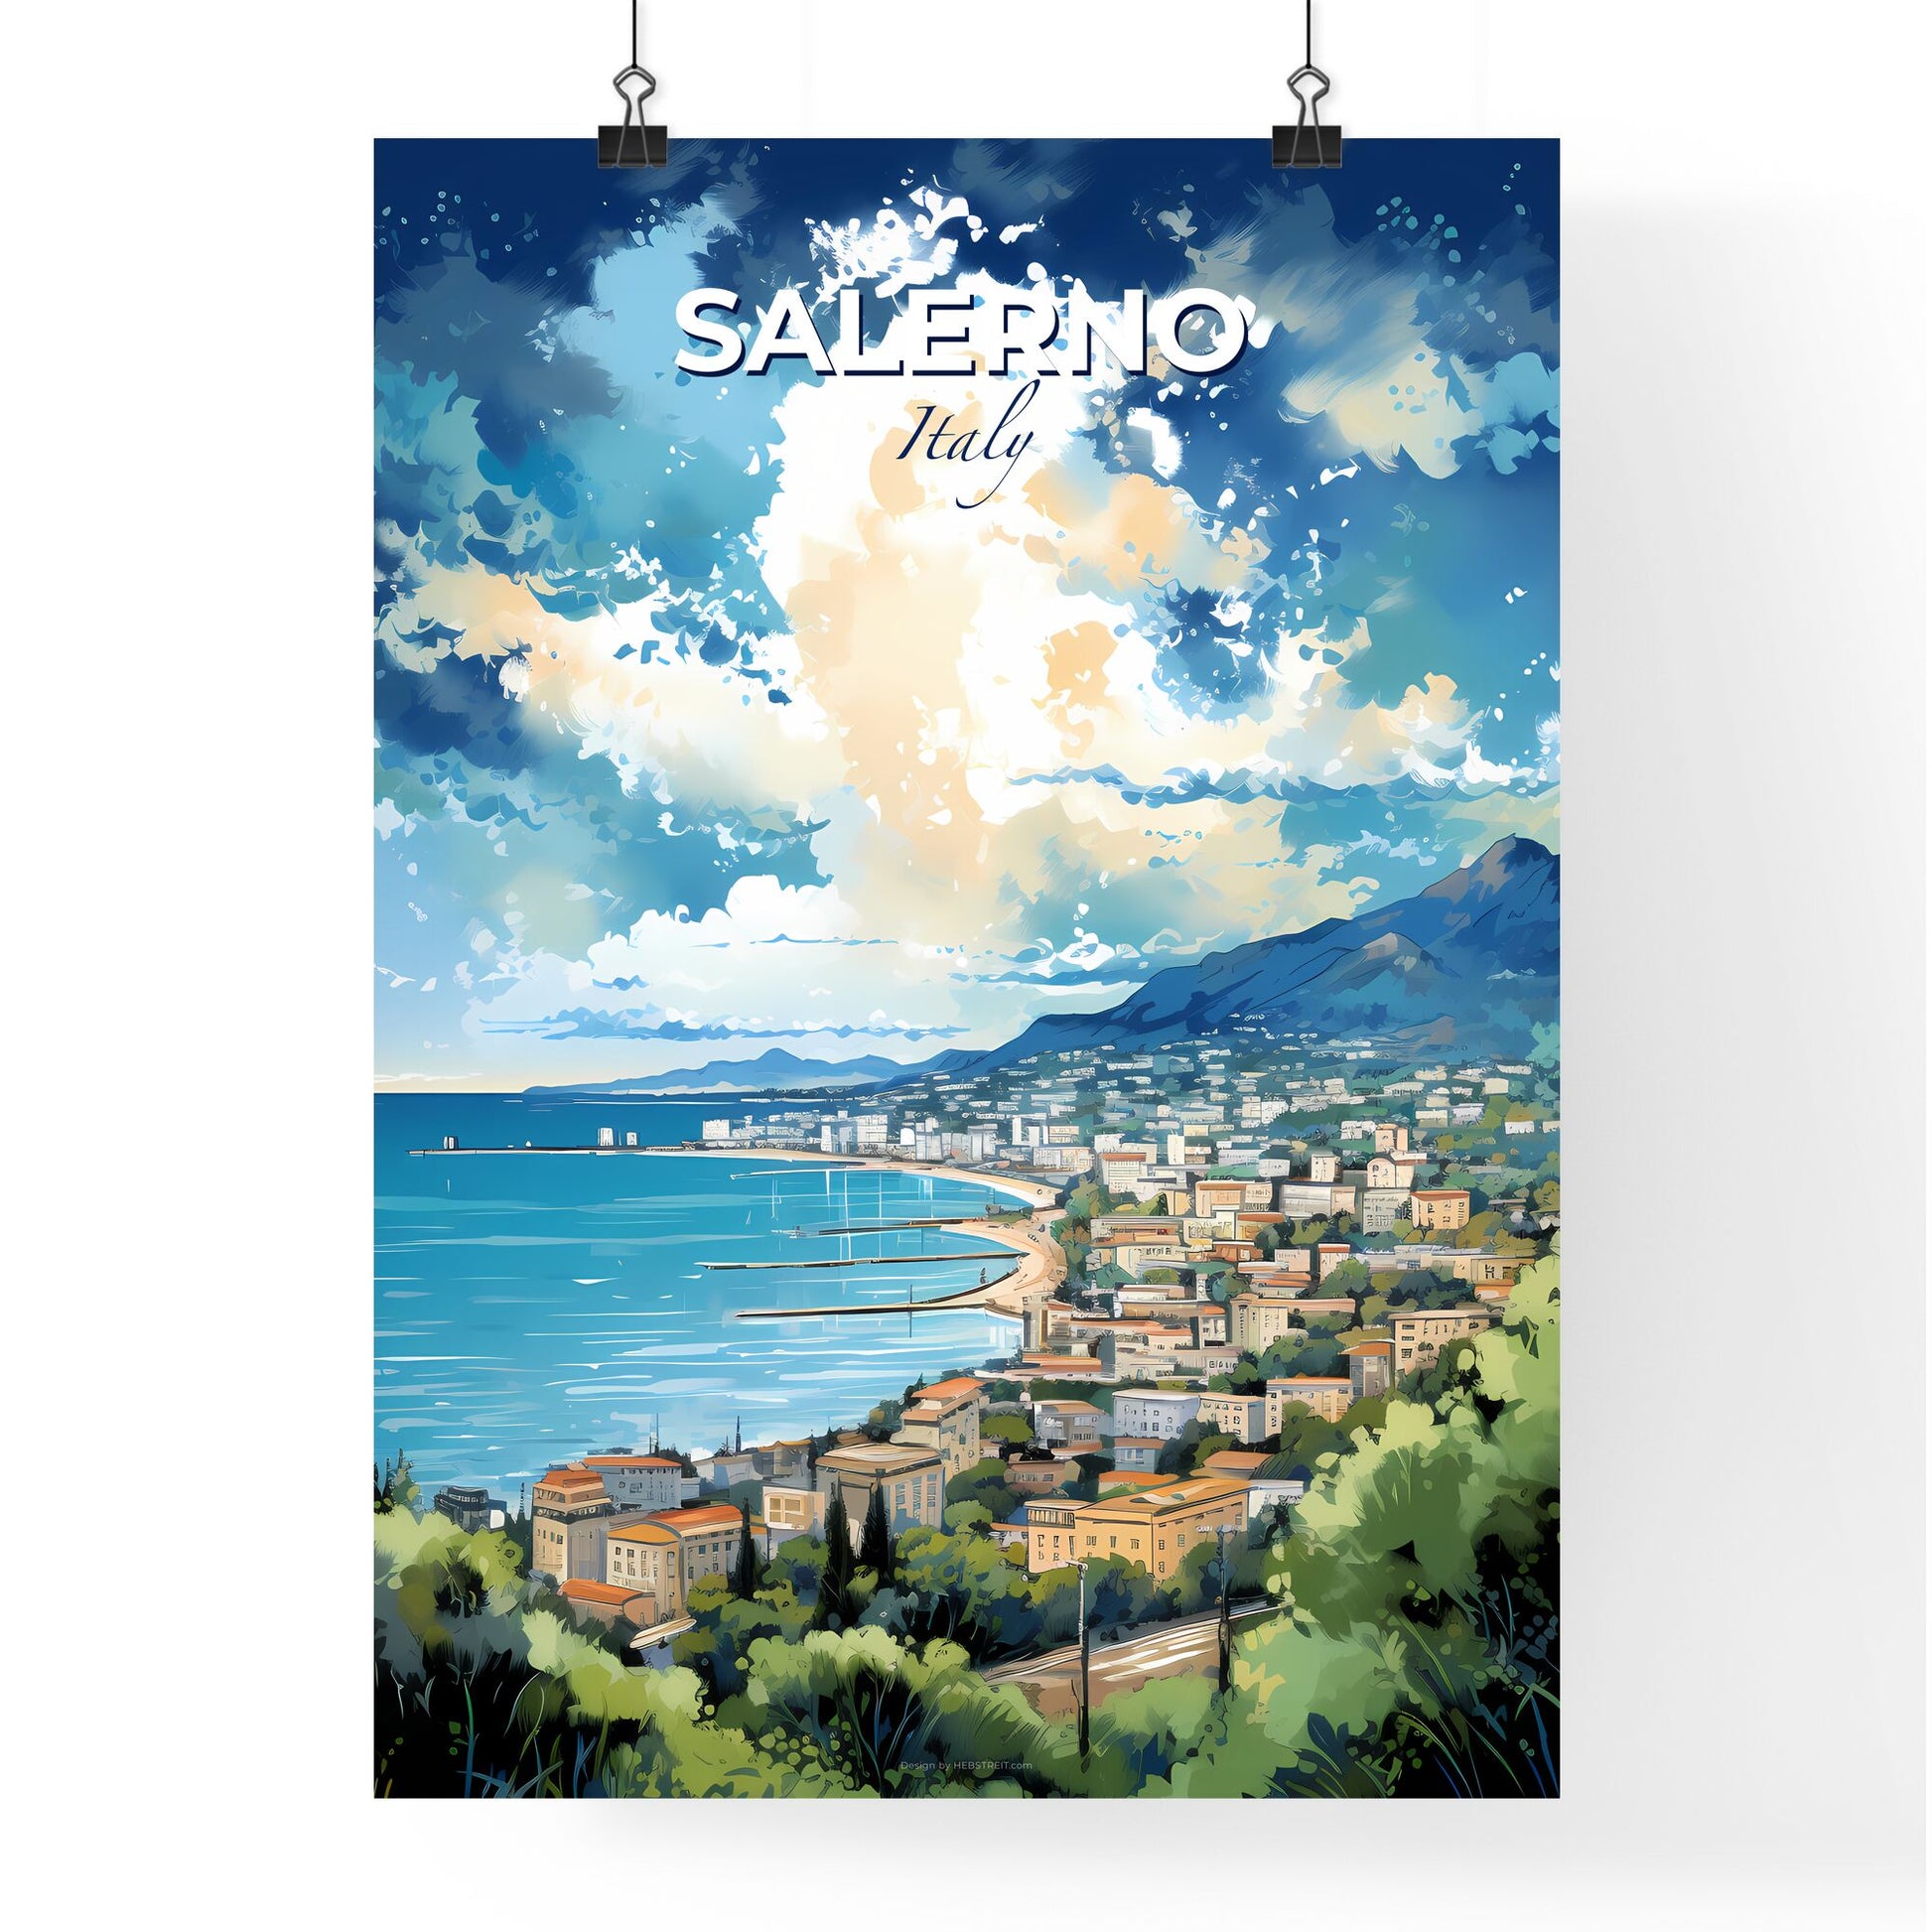 Salerno Italy Skyline - A City By The Sea - Customizable Travel Gift Default Title